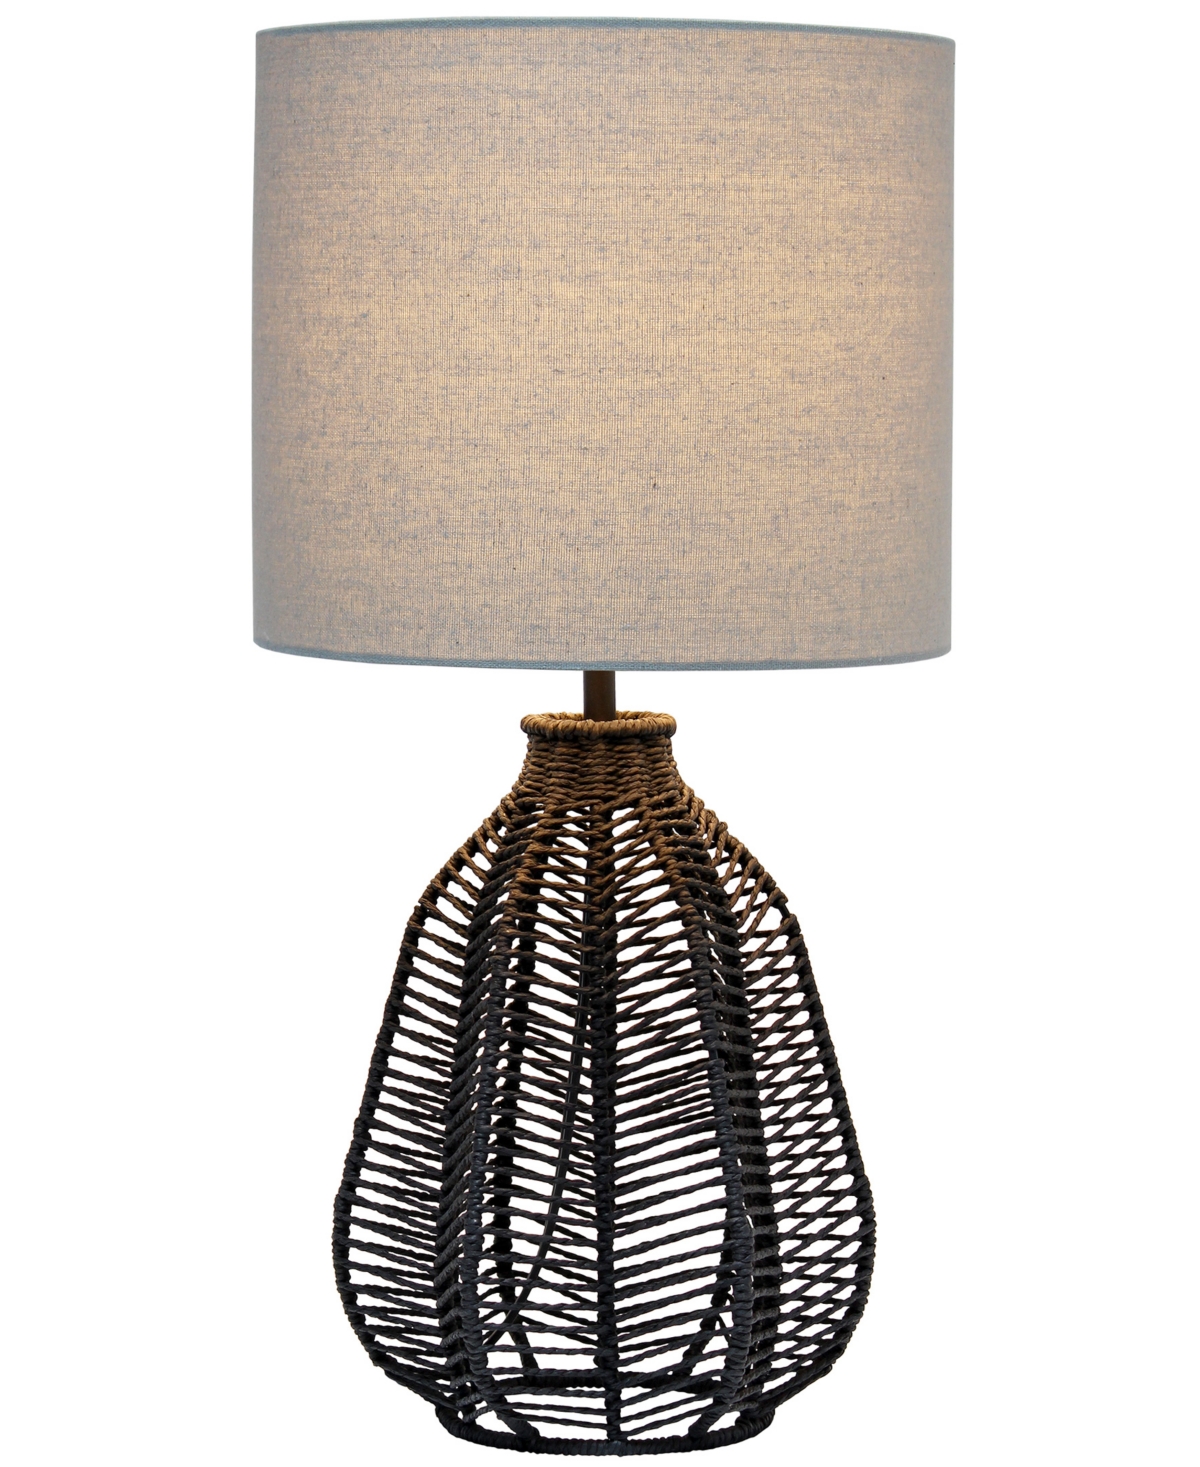 All The Rages 21" Vintage-like Rattan Wicker Style Paper Rope Bedside Table Lamp With Light Beige Fabric Shade In Black